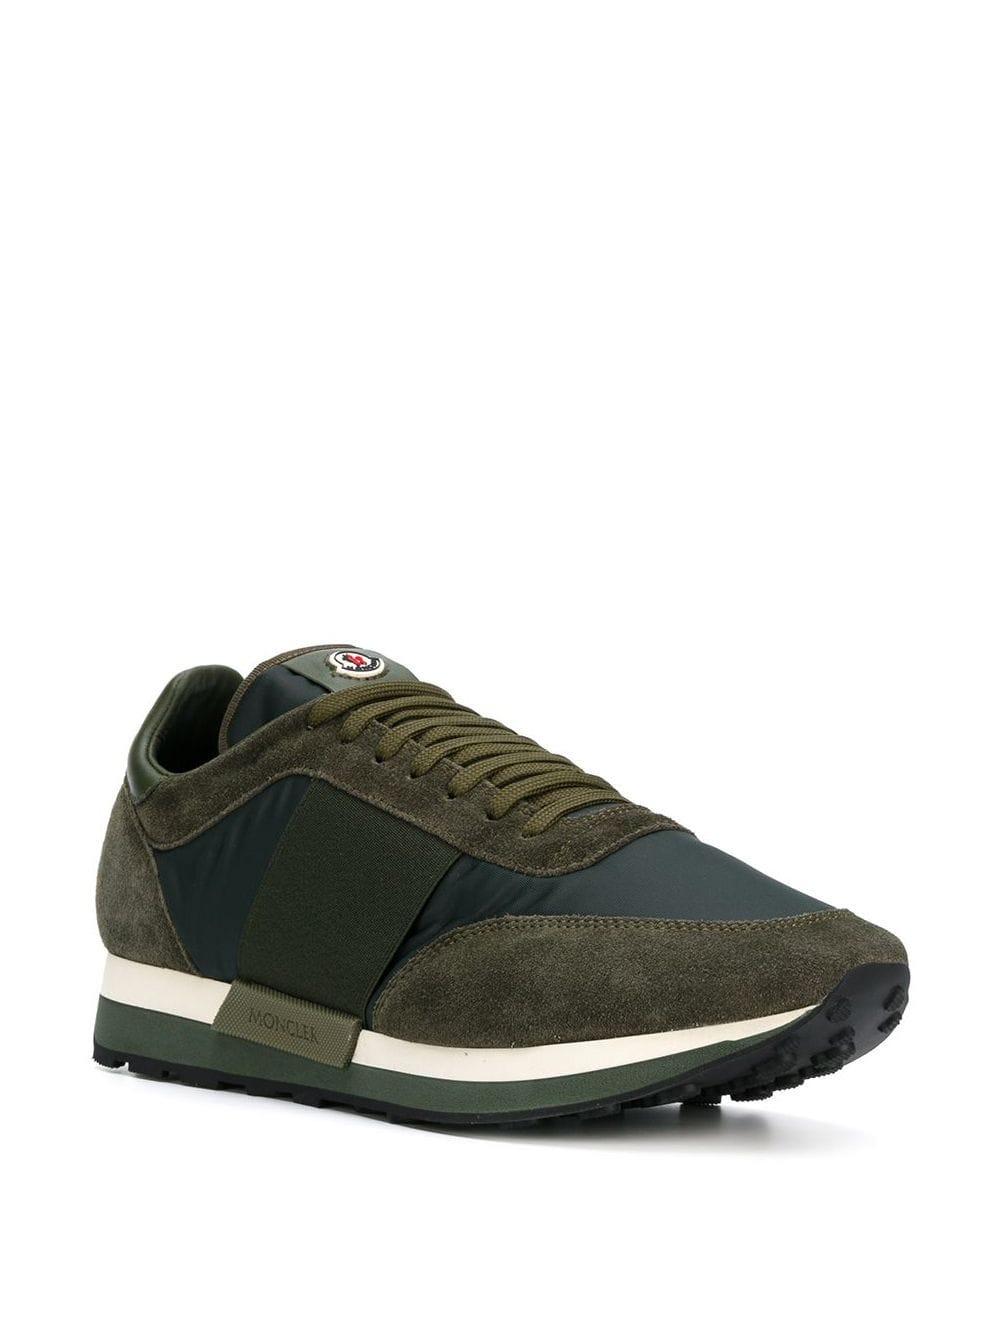 Moncler Suede Horace Sneakers in Green for Men | Lyst